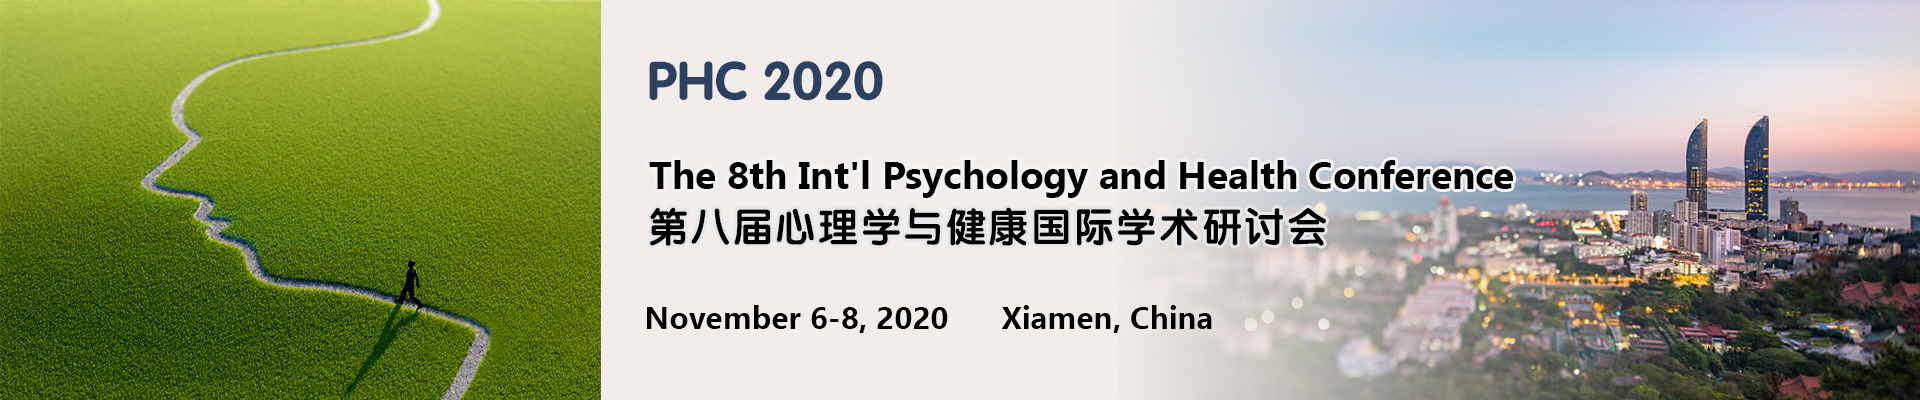 The 8th Int'l Psychology and Health Conference (PHC 2020), Xiamen, Fujian, China